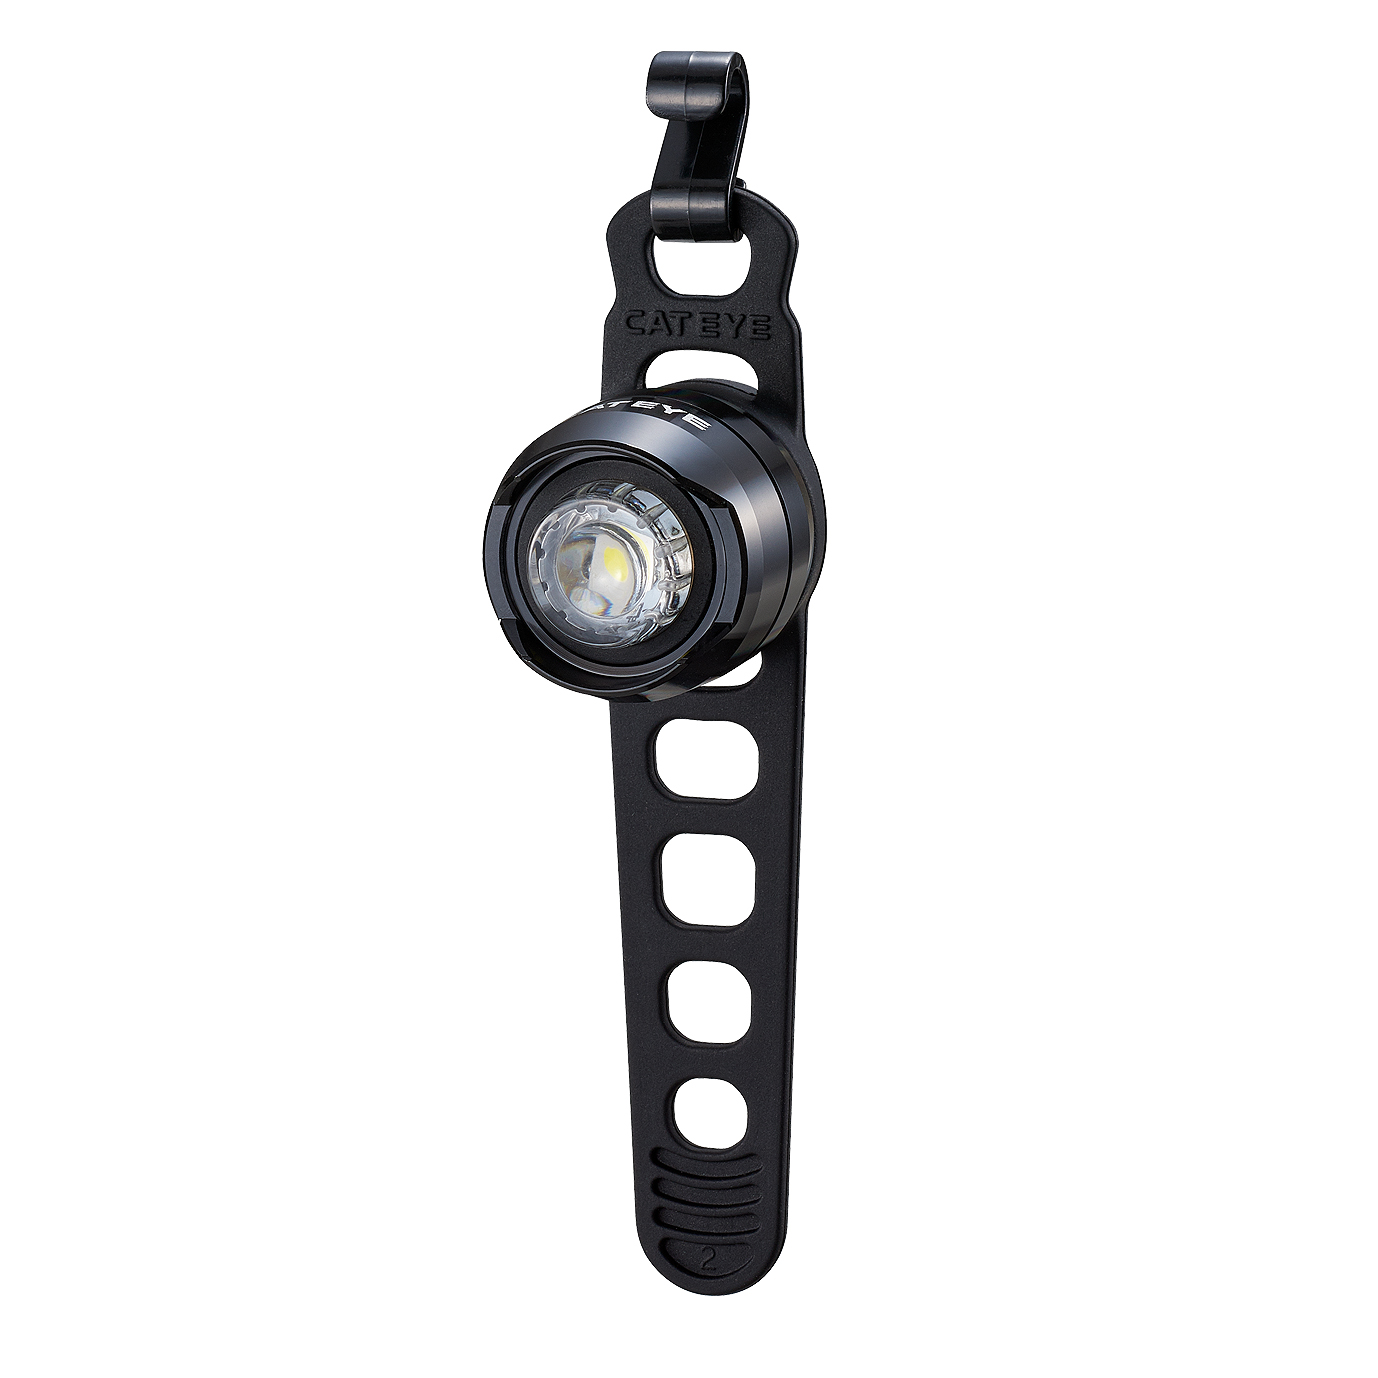 CATEYE TL-LD170-F Bicycle Safety Light for Front from Japan 